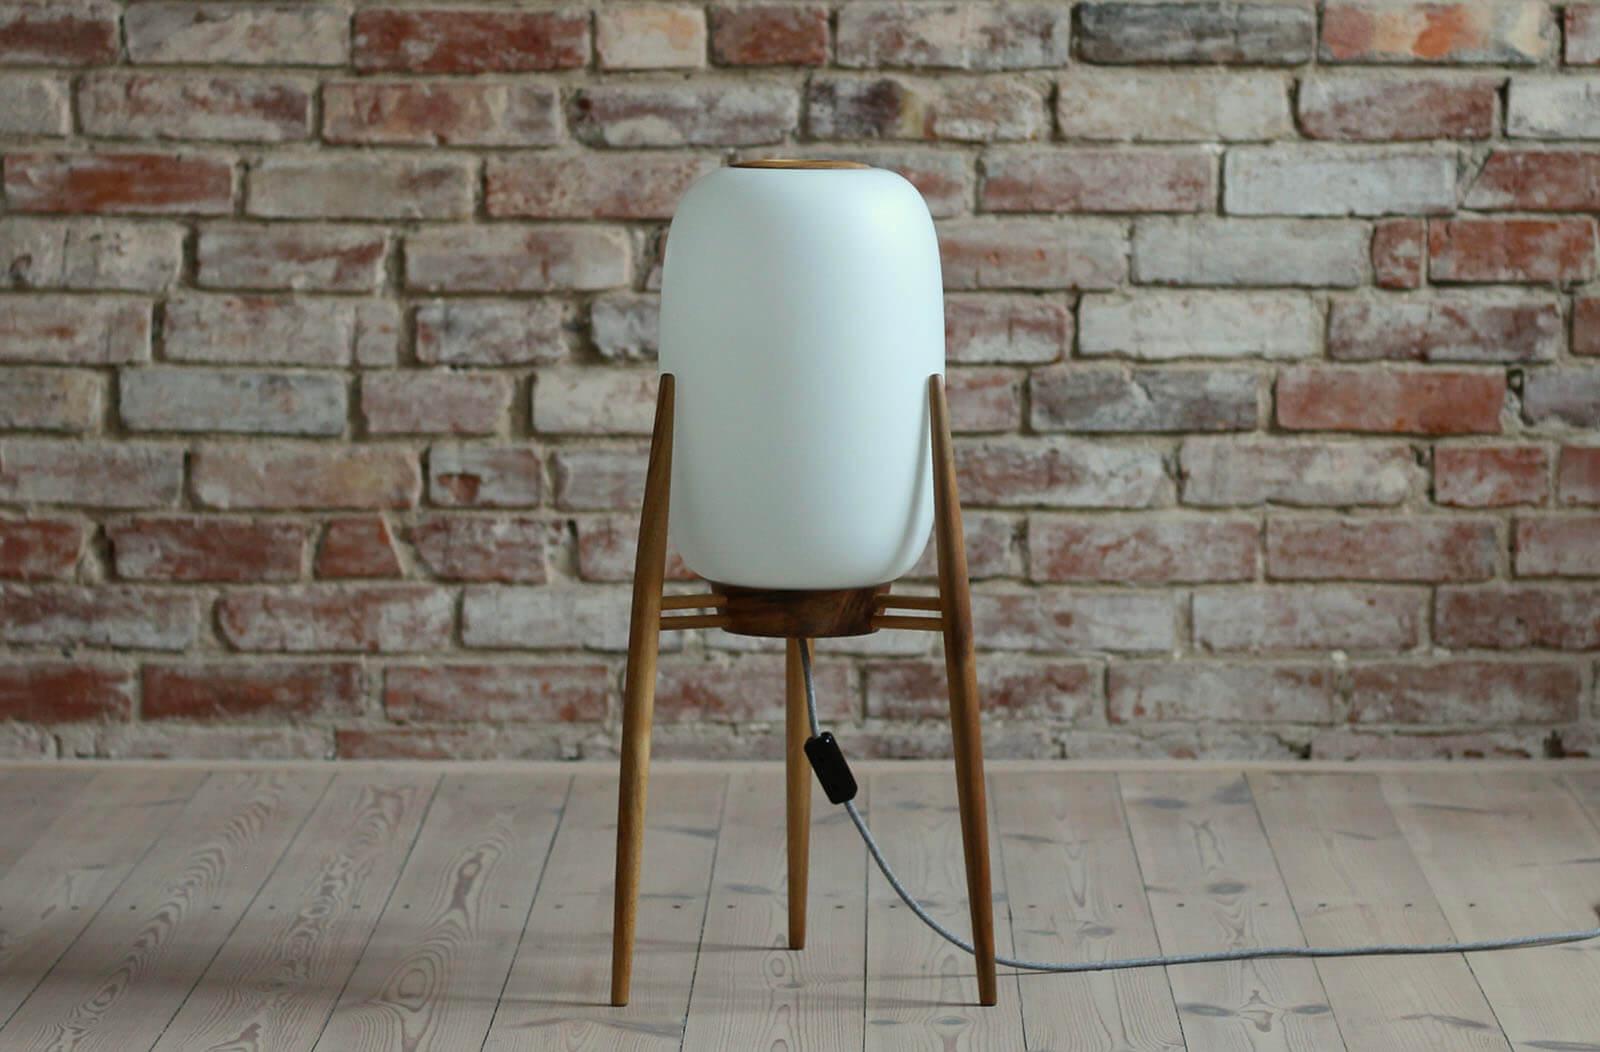 This Space Age floor lamp was produced in the 1960s in Czech Republic. It features a beautifully shaped wooden tripod base and a milk - white glass lampshade. The lamp gives a soft and warm light creating pleasant atmosphere in the room. The